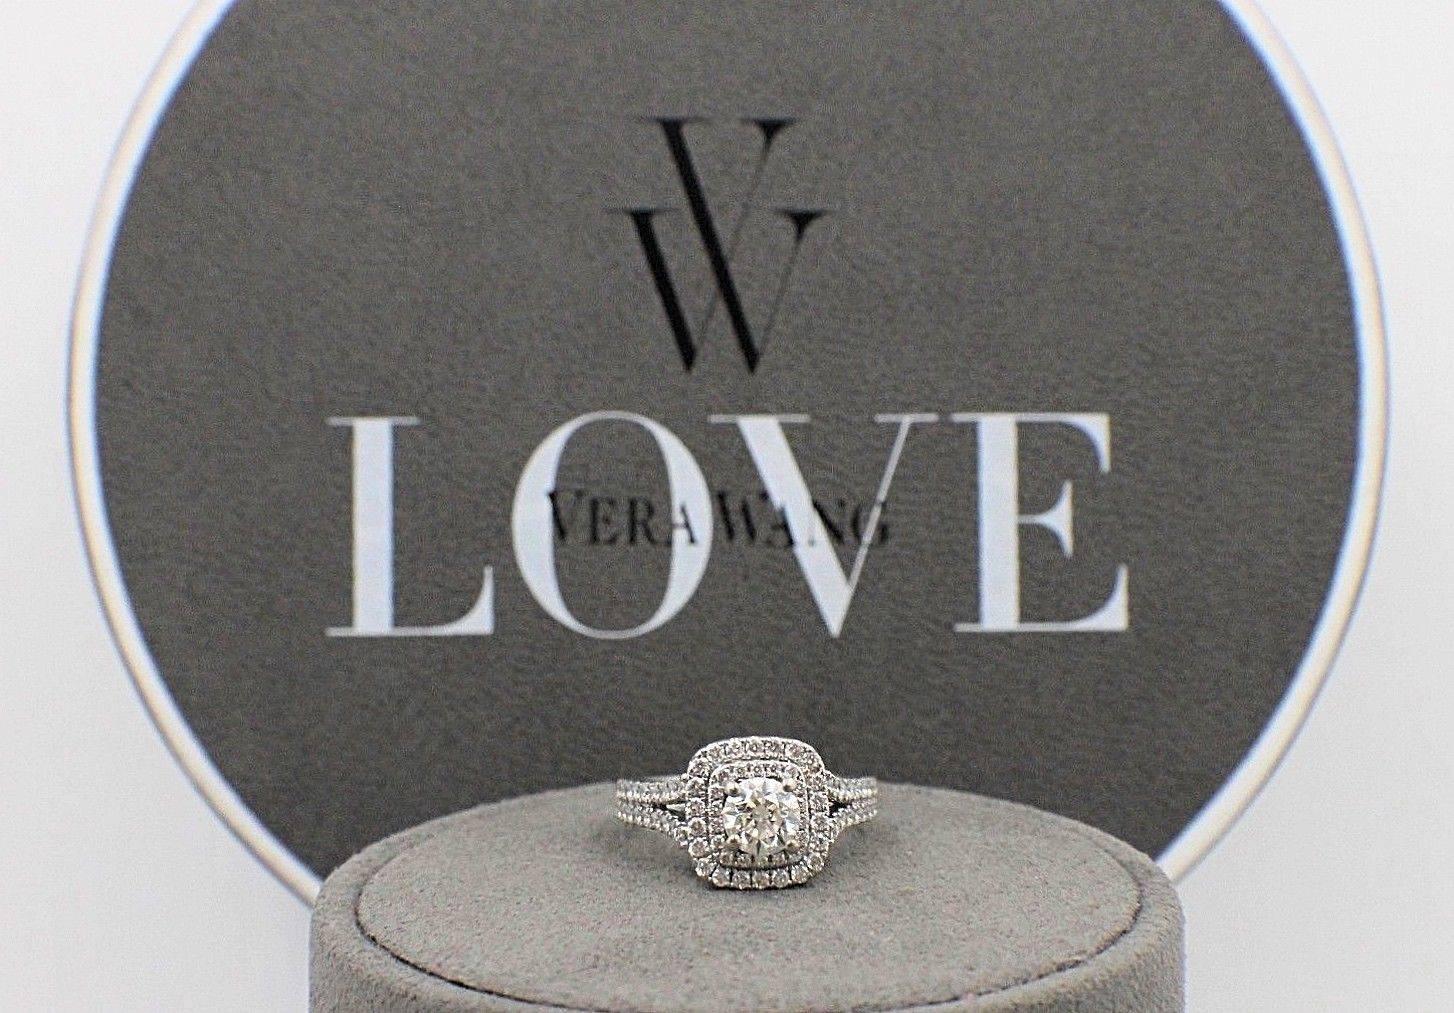 VERA WANG BRIDAL LOVE COLLECTION
Style:  Split Shank Halo Diamond Engagement Ring 1 1/2 TCW
Sku Number:  19993147
Metal:  14KT White Gold
Size:  5 - sizable 
Total Carat Weight:  1 1/2 TCW
Center Diamond Shape:  Round Brilliant Diamond 3/4 CTS H - I